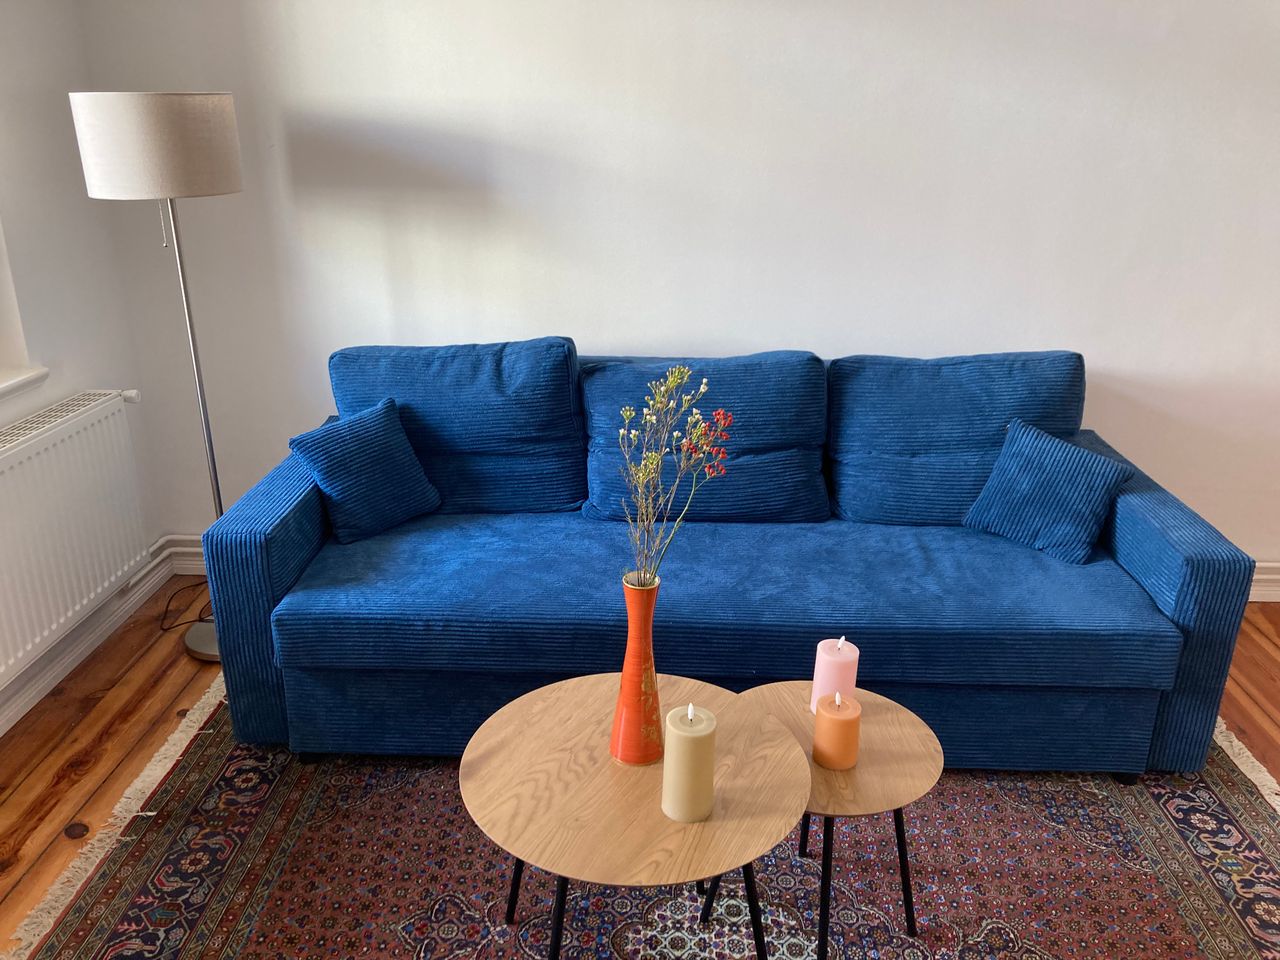 Cosy new: 2-room apartment with a balcony in Prenzlauer Berg